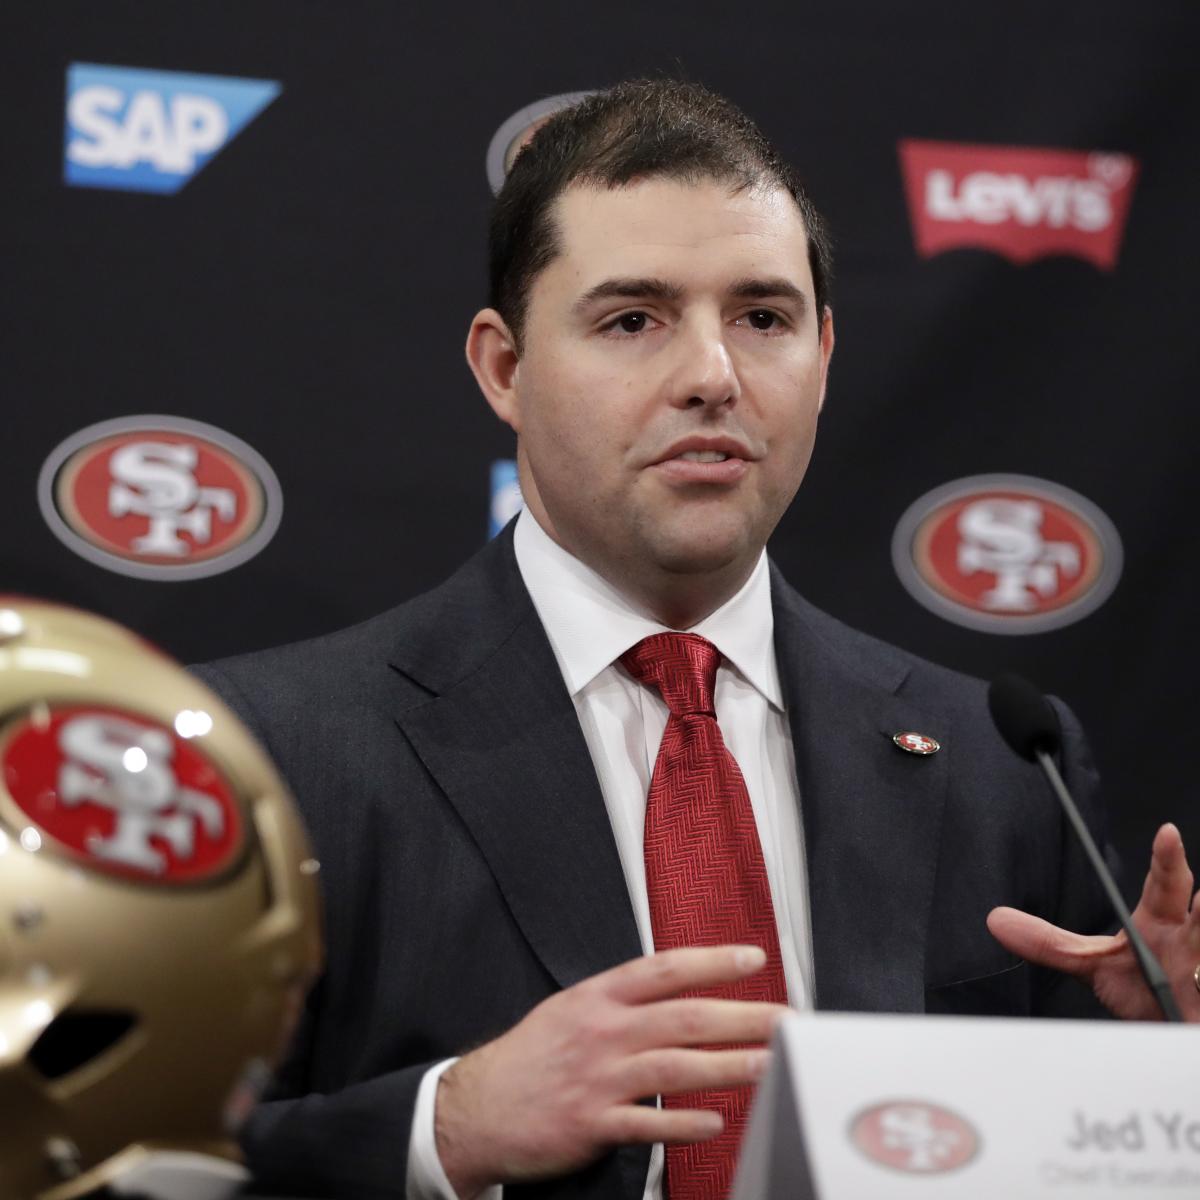 49ers’ Jed York: There Will Be an NFL Season ‘In Some Formula, Form or Form’